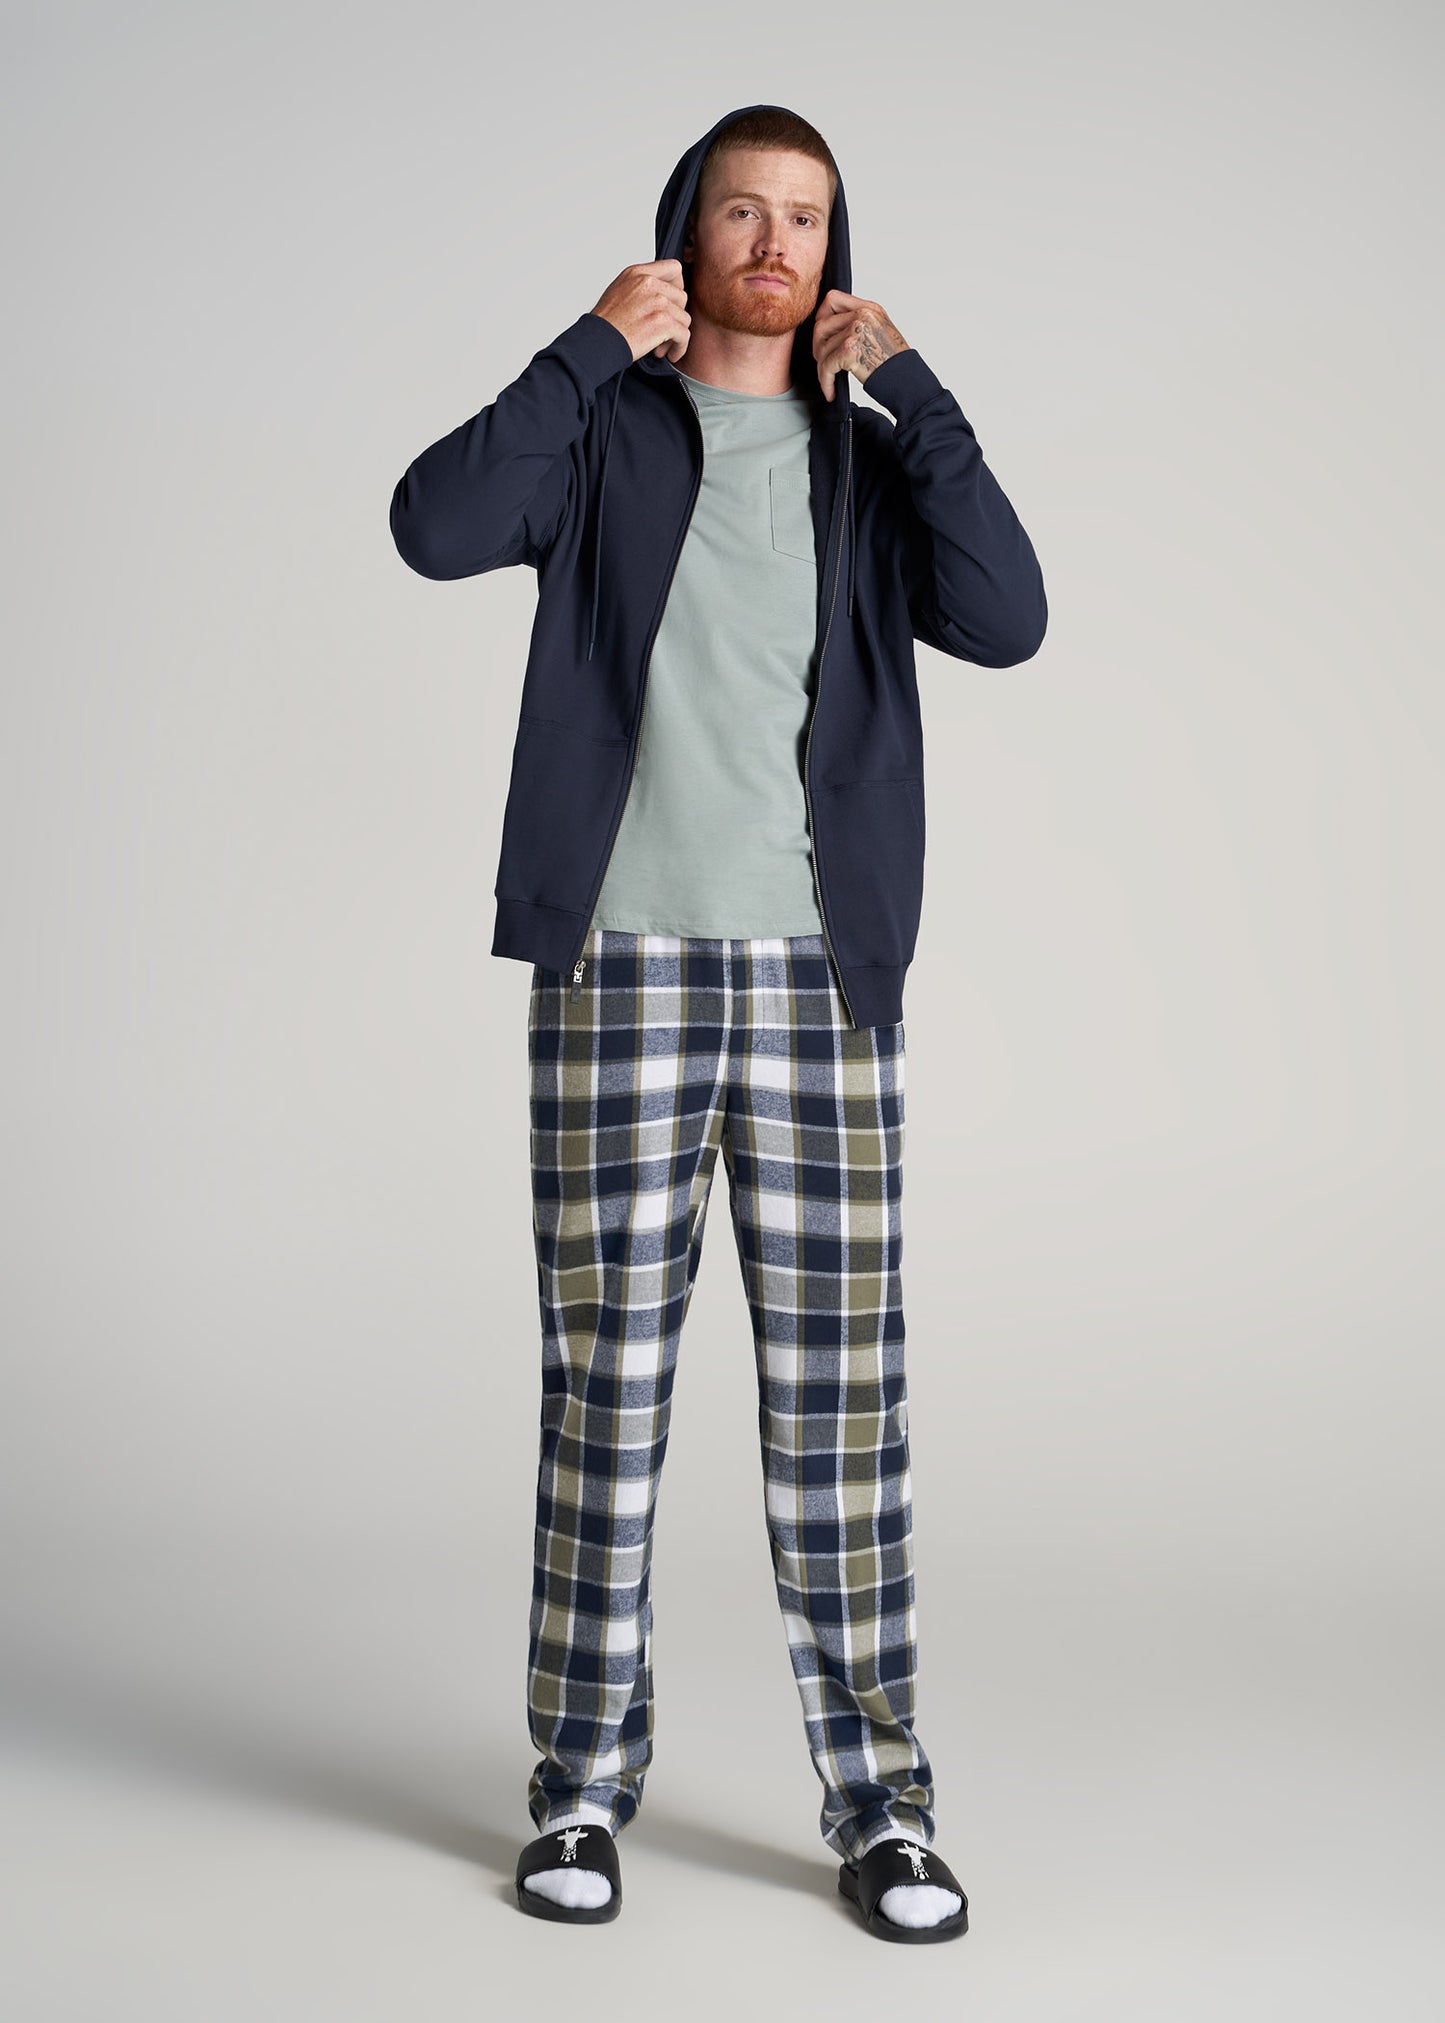         American-Tall-Men-Flannel-Pajamas-Olive-Navy-Grid-full